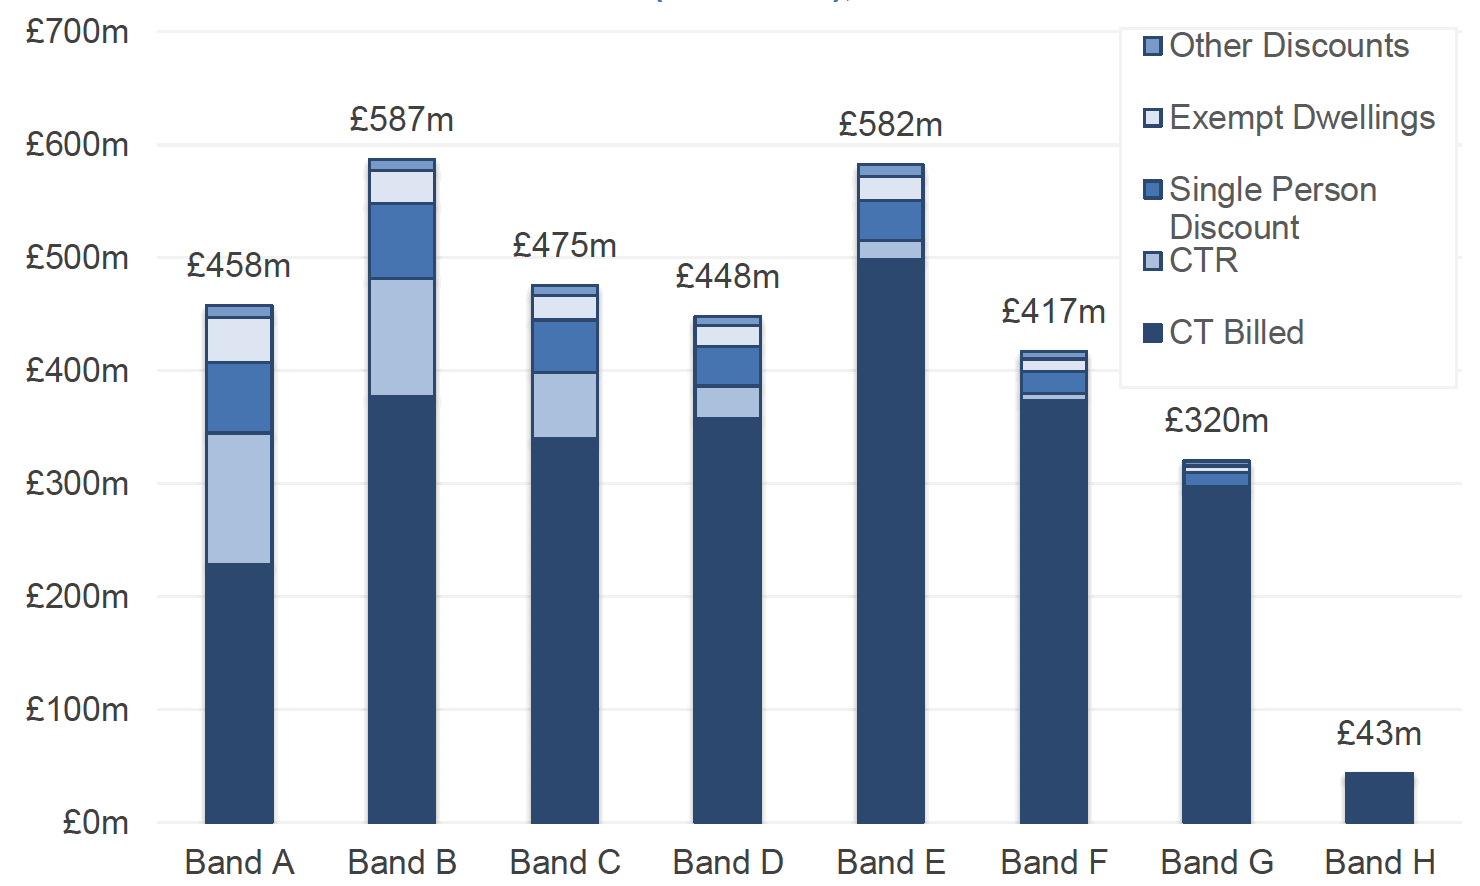 Stacked bar chart showing Council Tax potential yield in 2019-20 by Council Tax band and different types of discounts and exemptions in £ millions